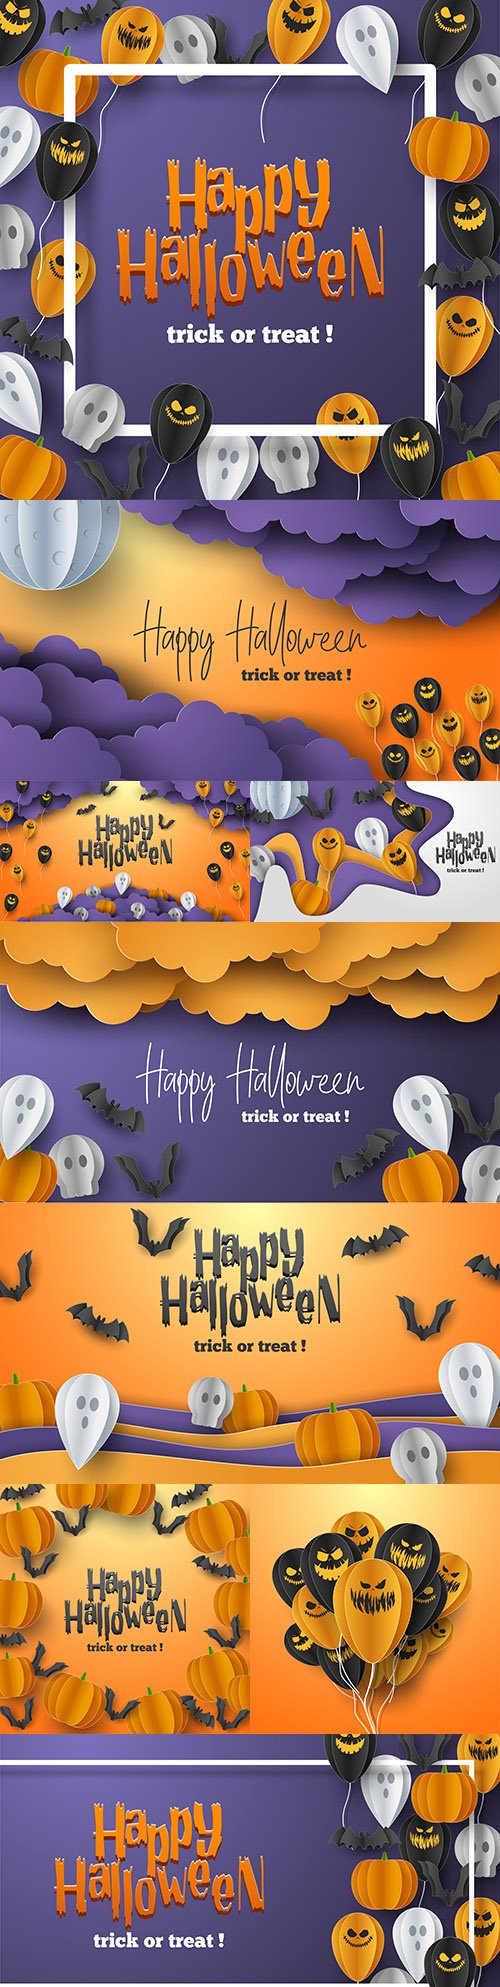 Happy Halloween holiday banner illustration collection 2